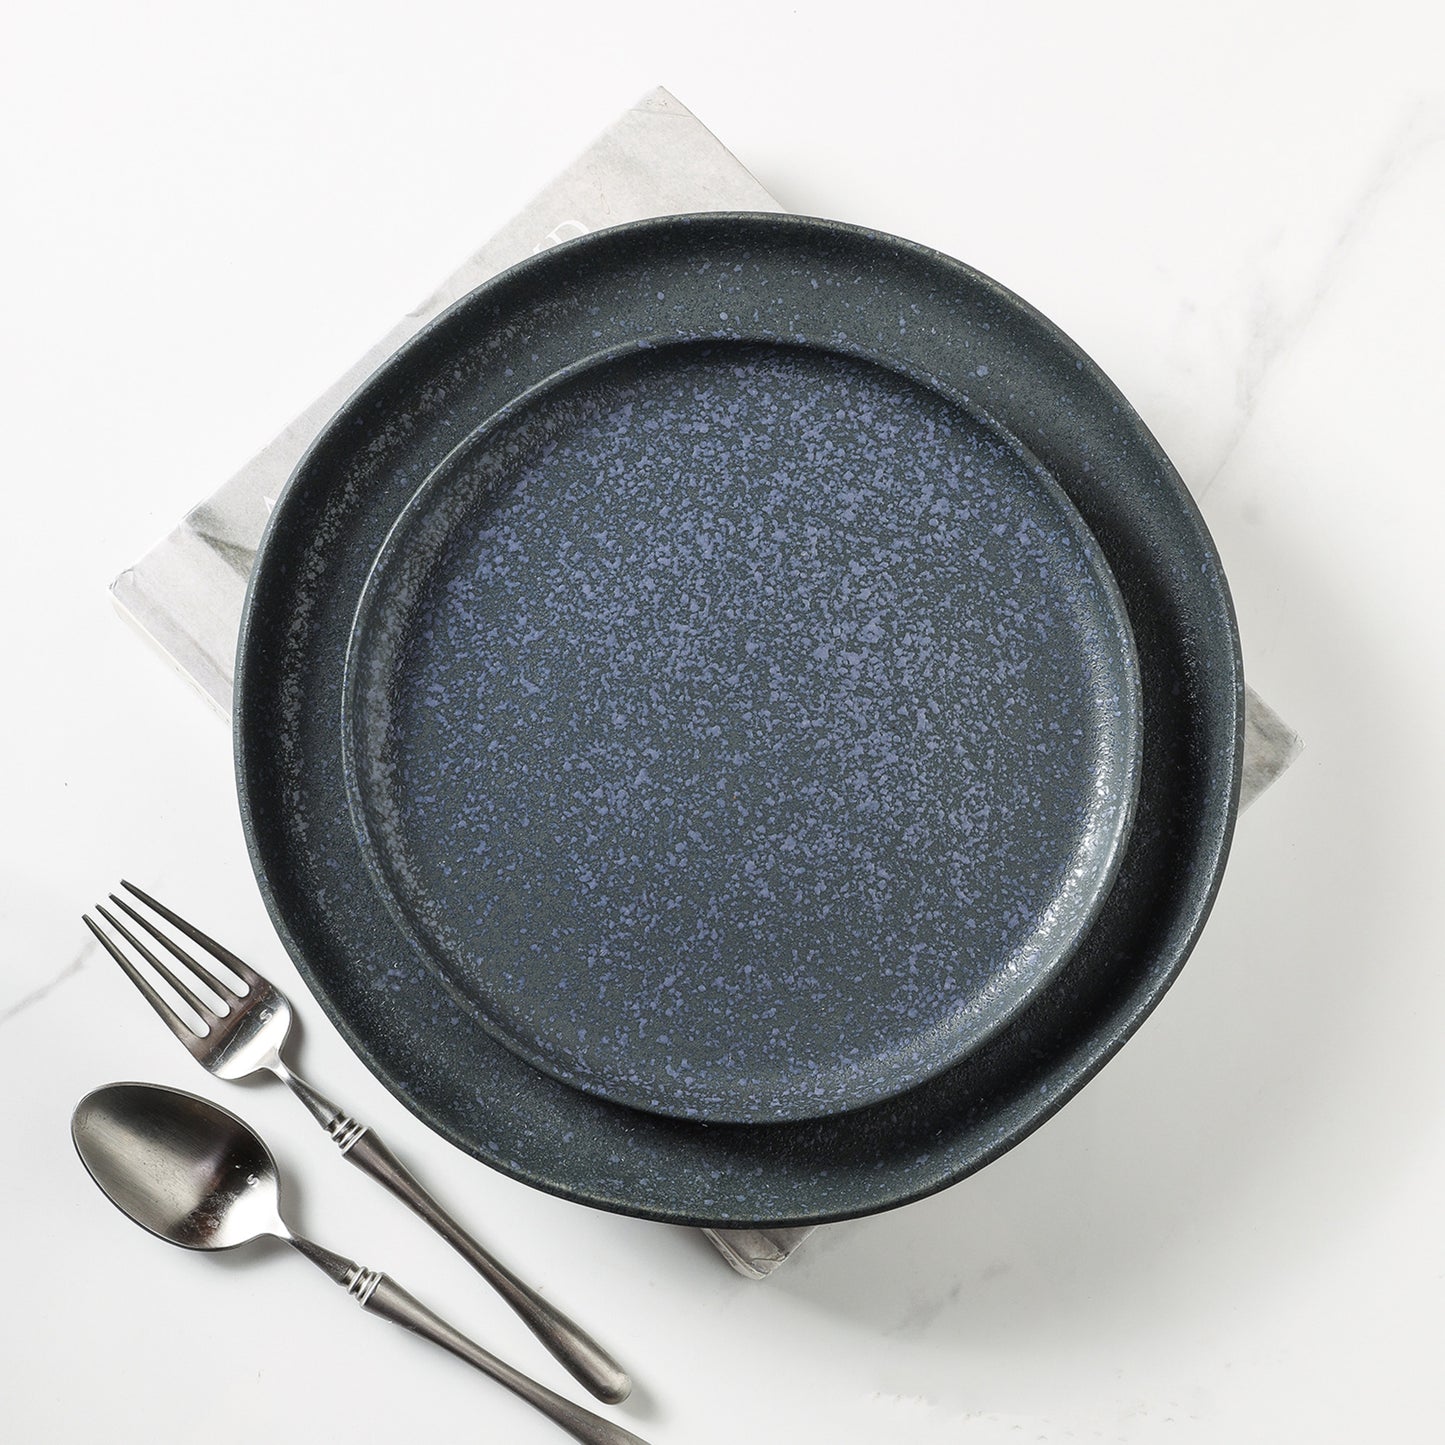 Tom Stoneware Dinner Plate - Gray And Blue Reflection